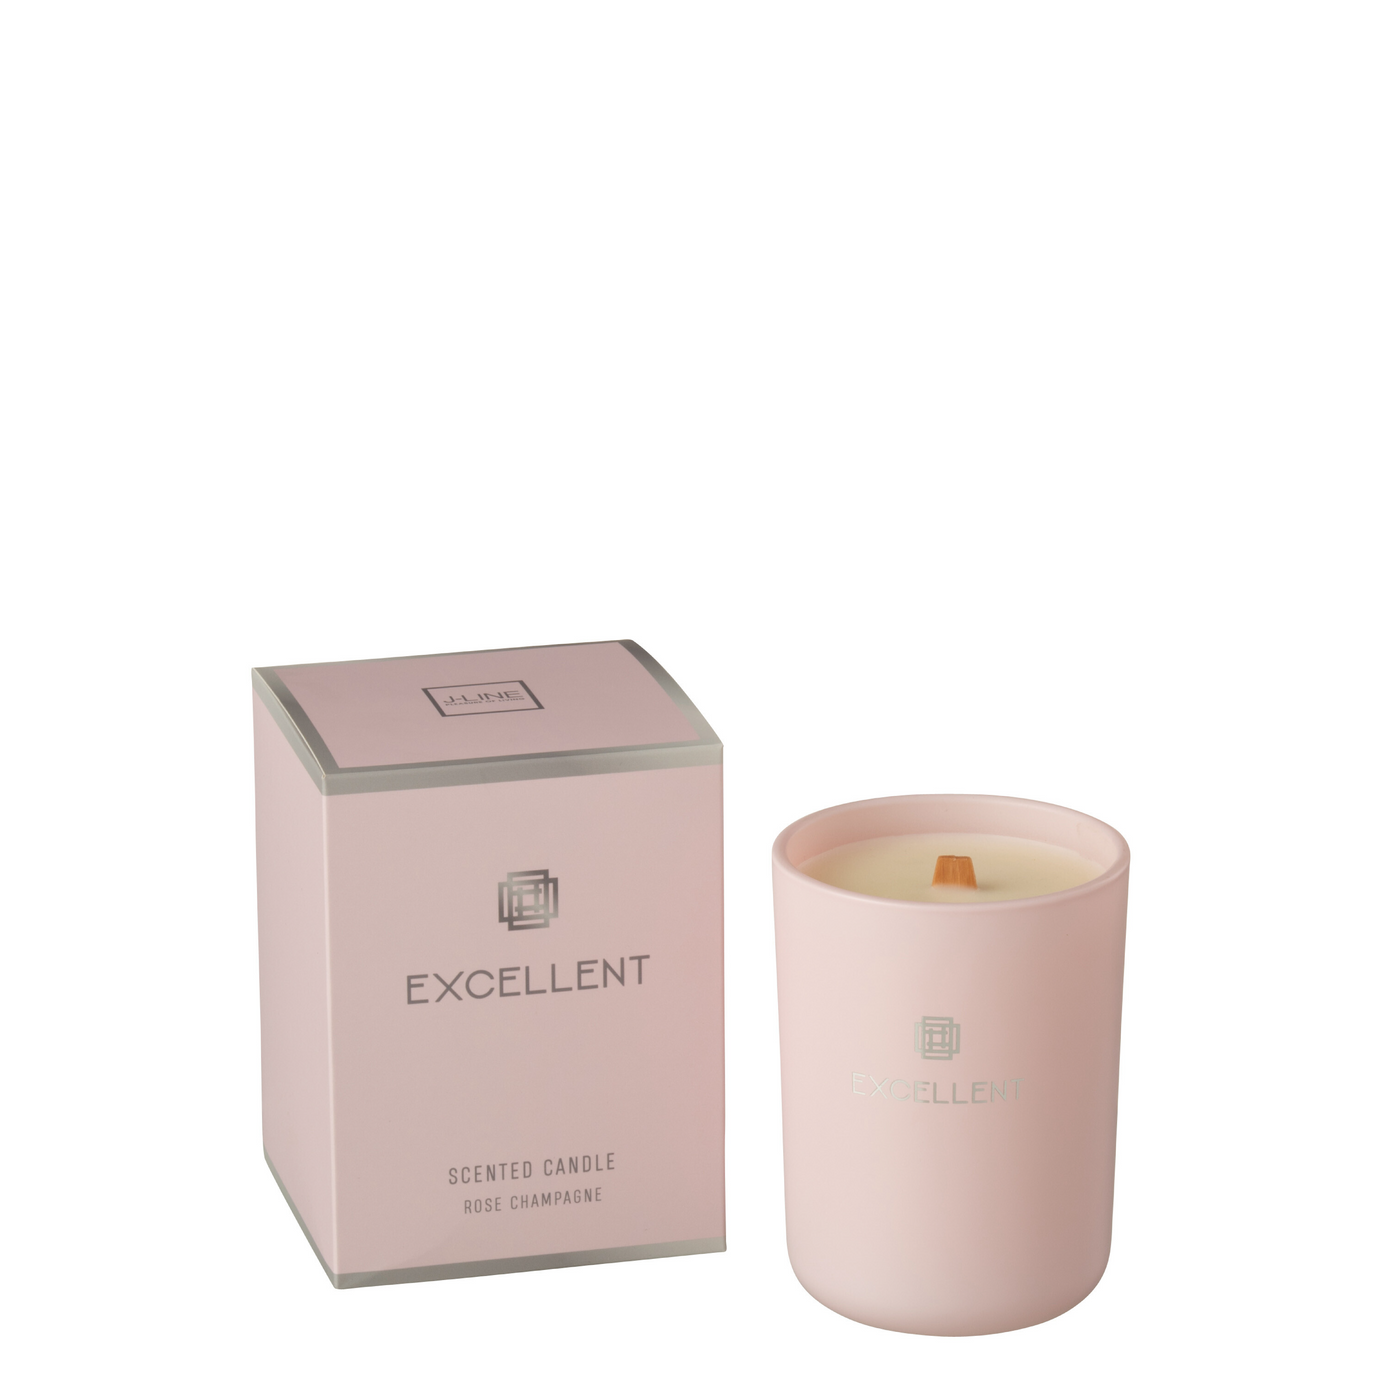 SCENTED CANDLE EXCELLENT GLASS PINK SMALL-50U